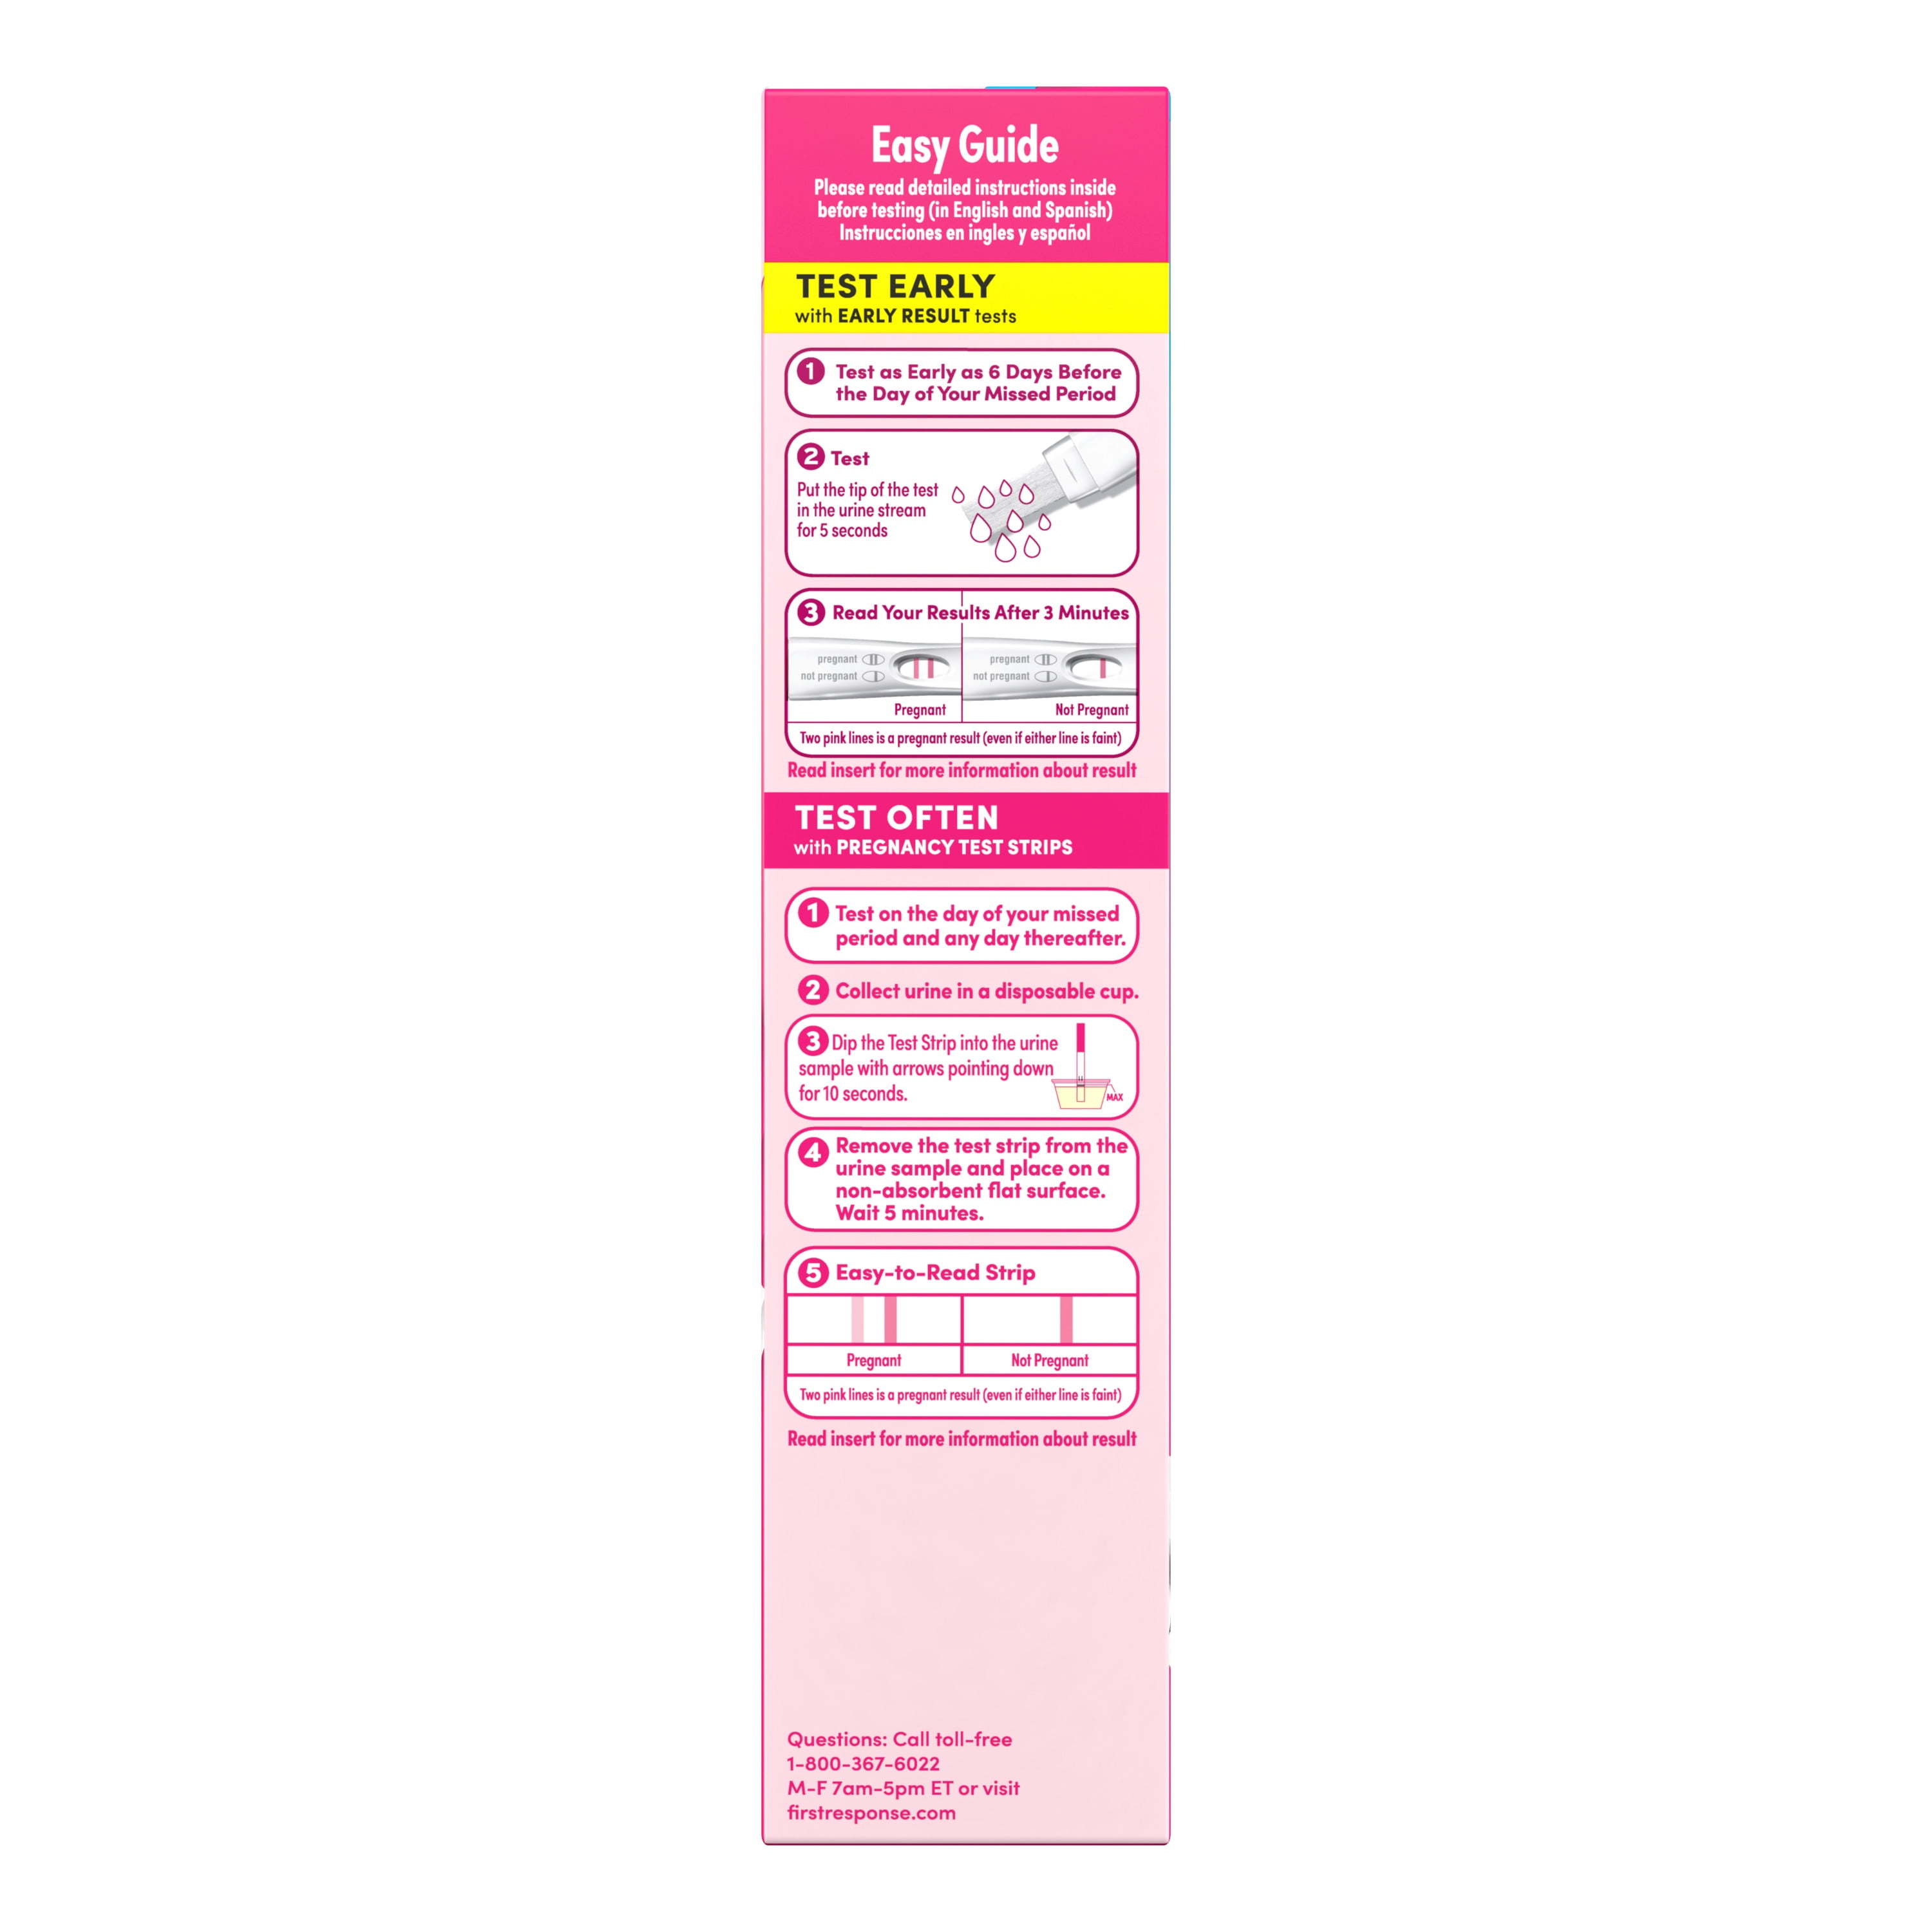 First Response Pregnancy Test, Value Pack, Comfort Check - 8 tests